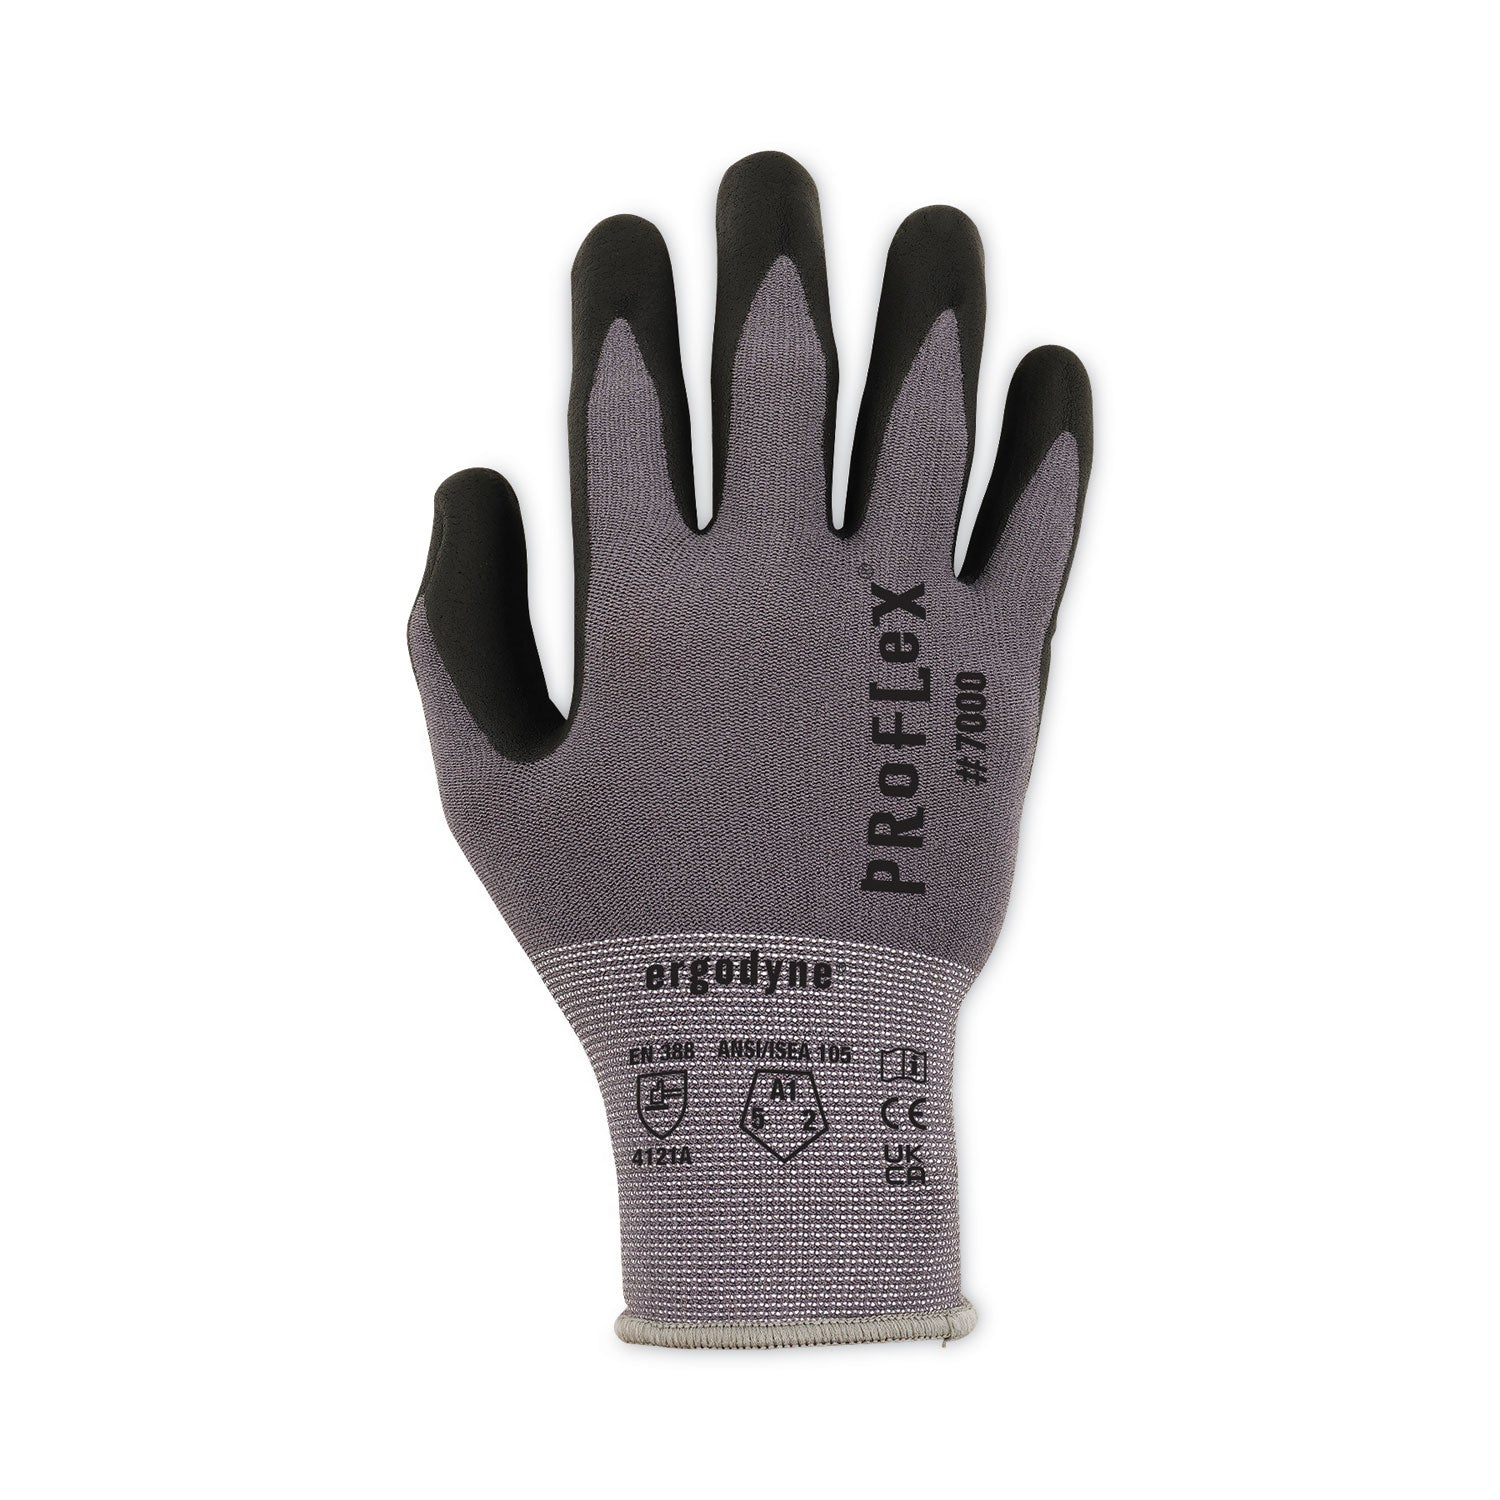 proflex-7000-nitrile-coated-gloves-microfoam-palm-gray-2x-large-12-pairs-pack-ships-in-1-3-business-days_ego10366 - 2